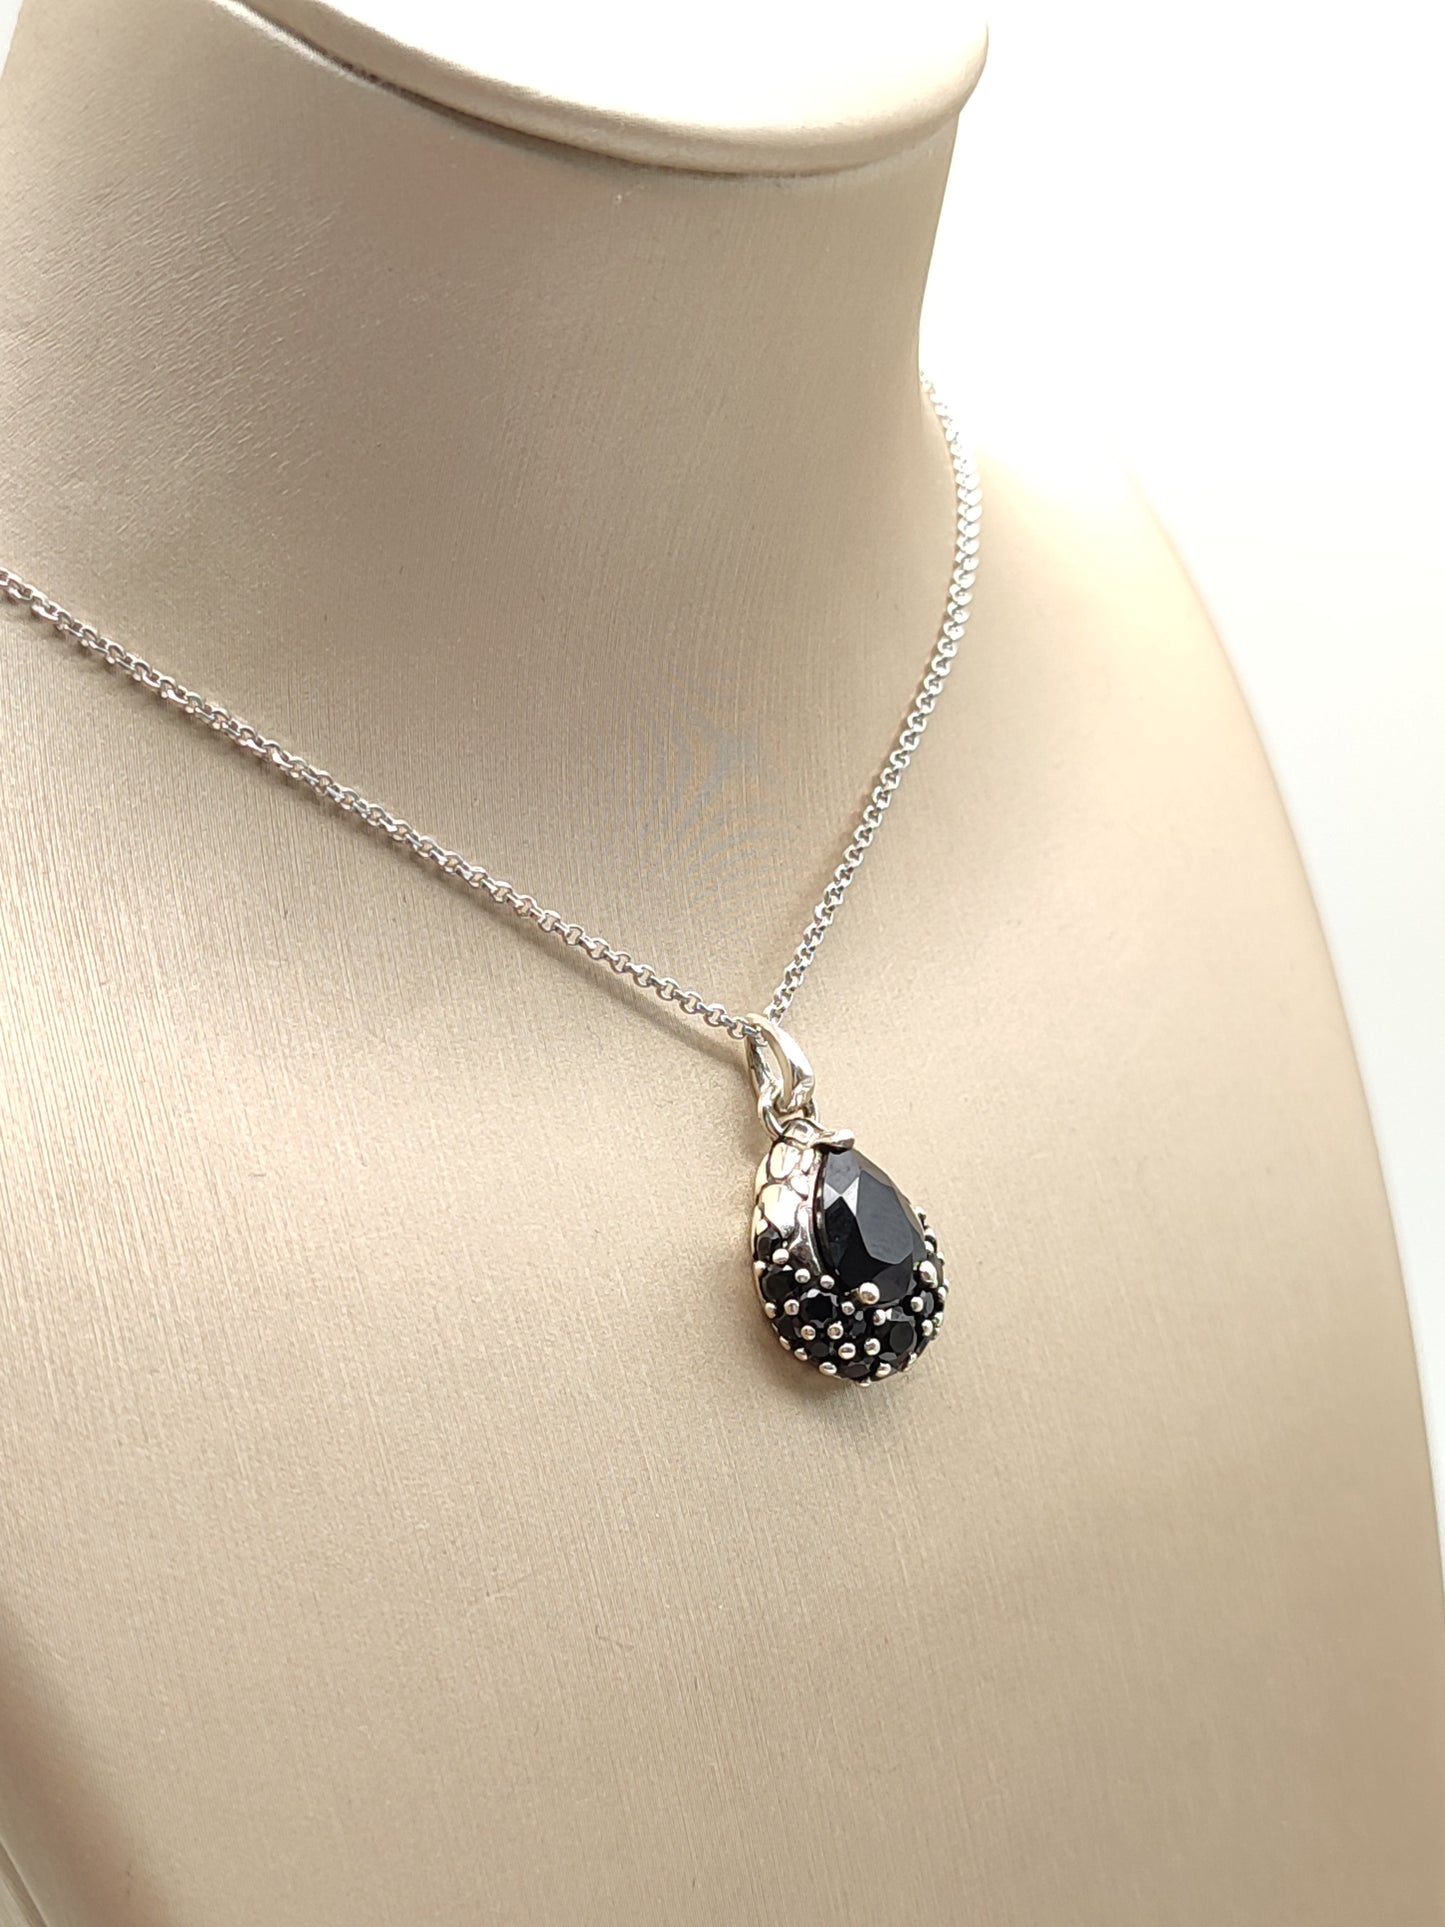 Choker with black spinel pendant